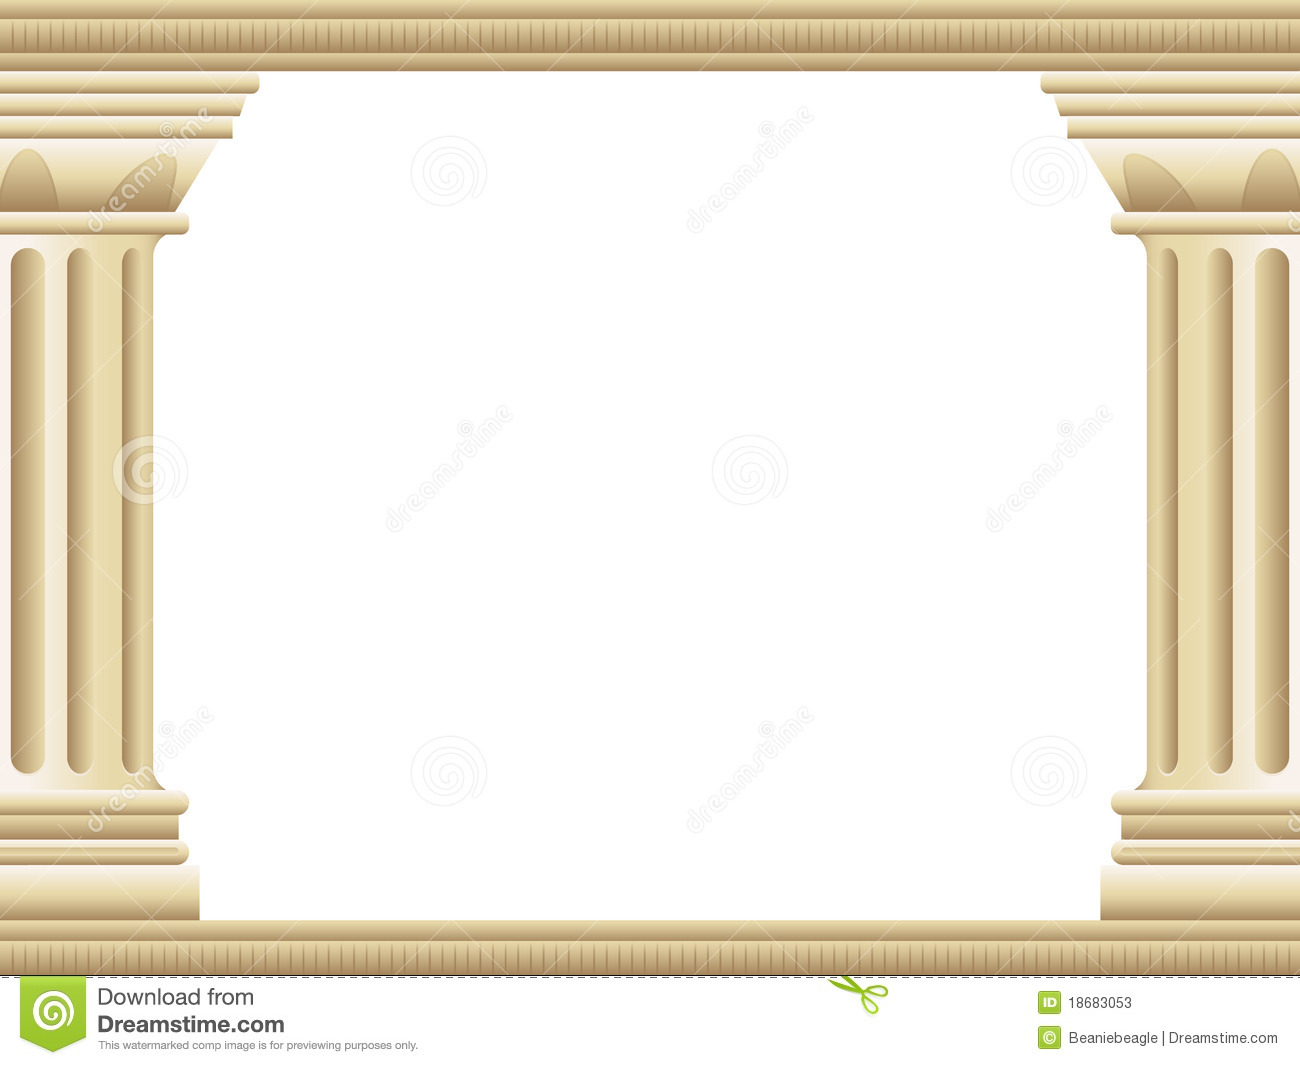 Background Border Illustration Of Two Ancient Greek Style Pillars